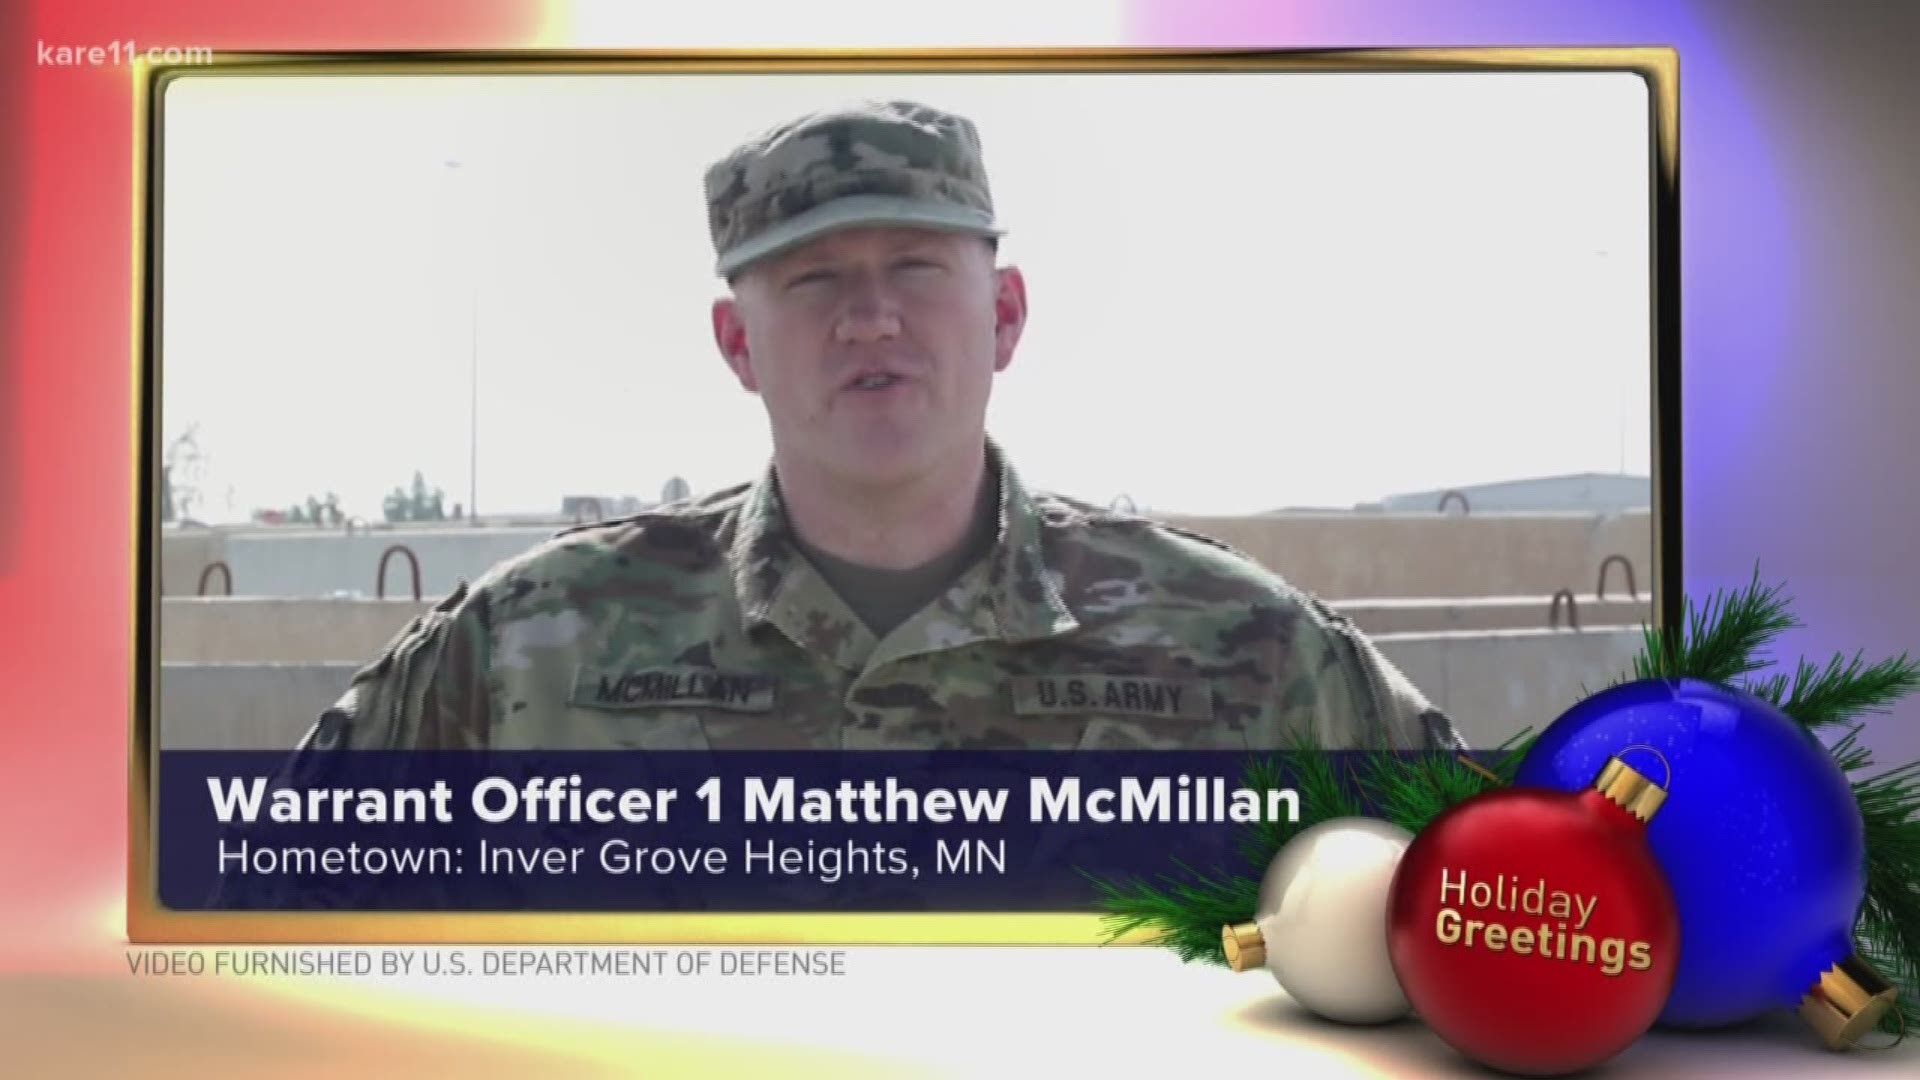 Warrant Officer 1 Matthew McMillan from Inver Grove Heights, Minn. sends his holiday greetings.